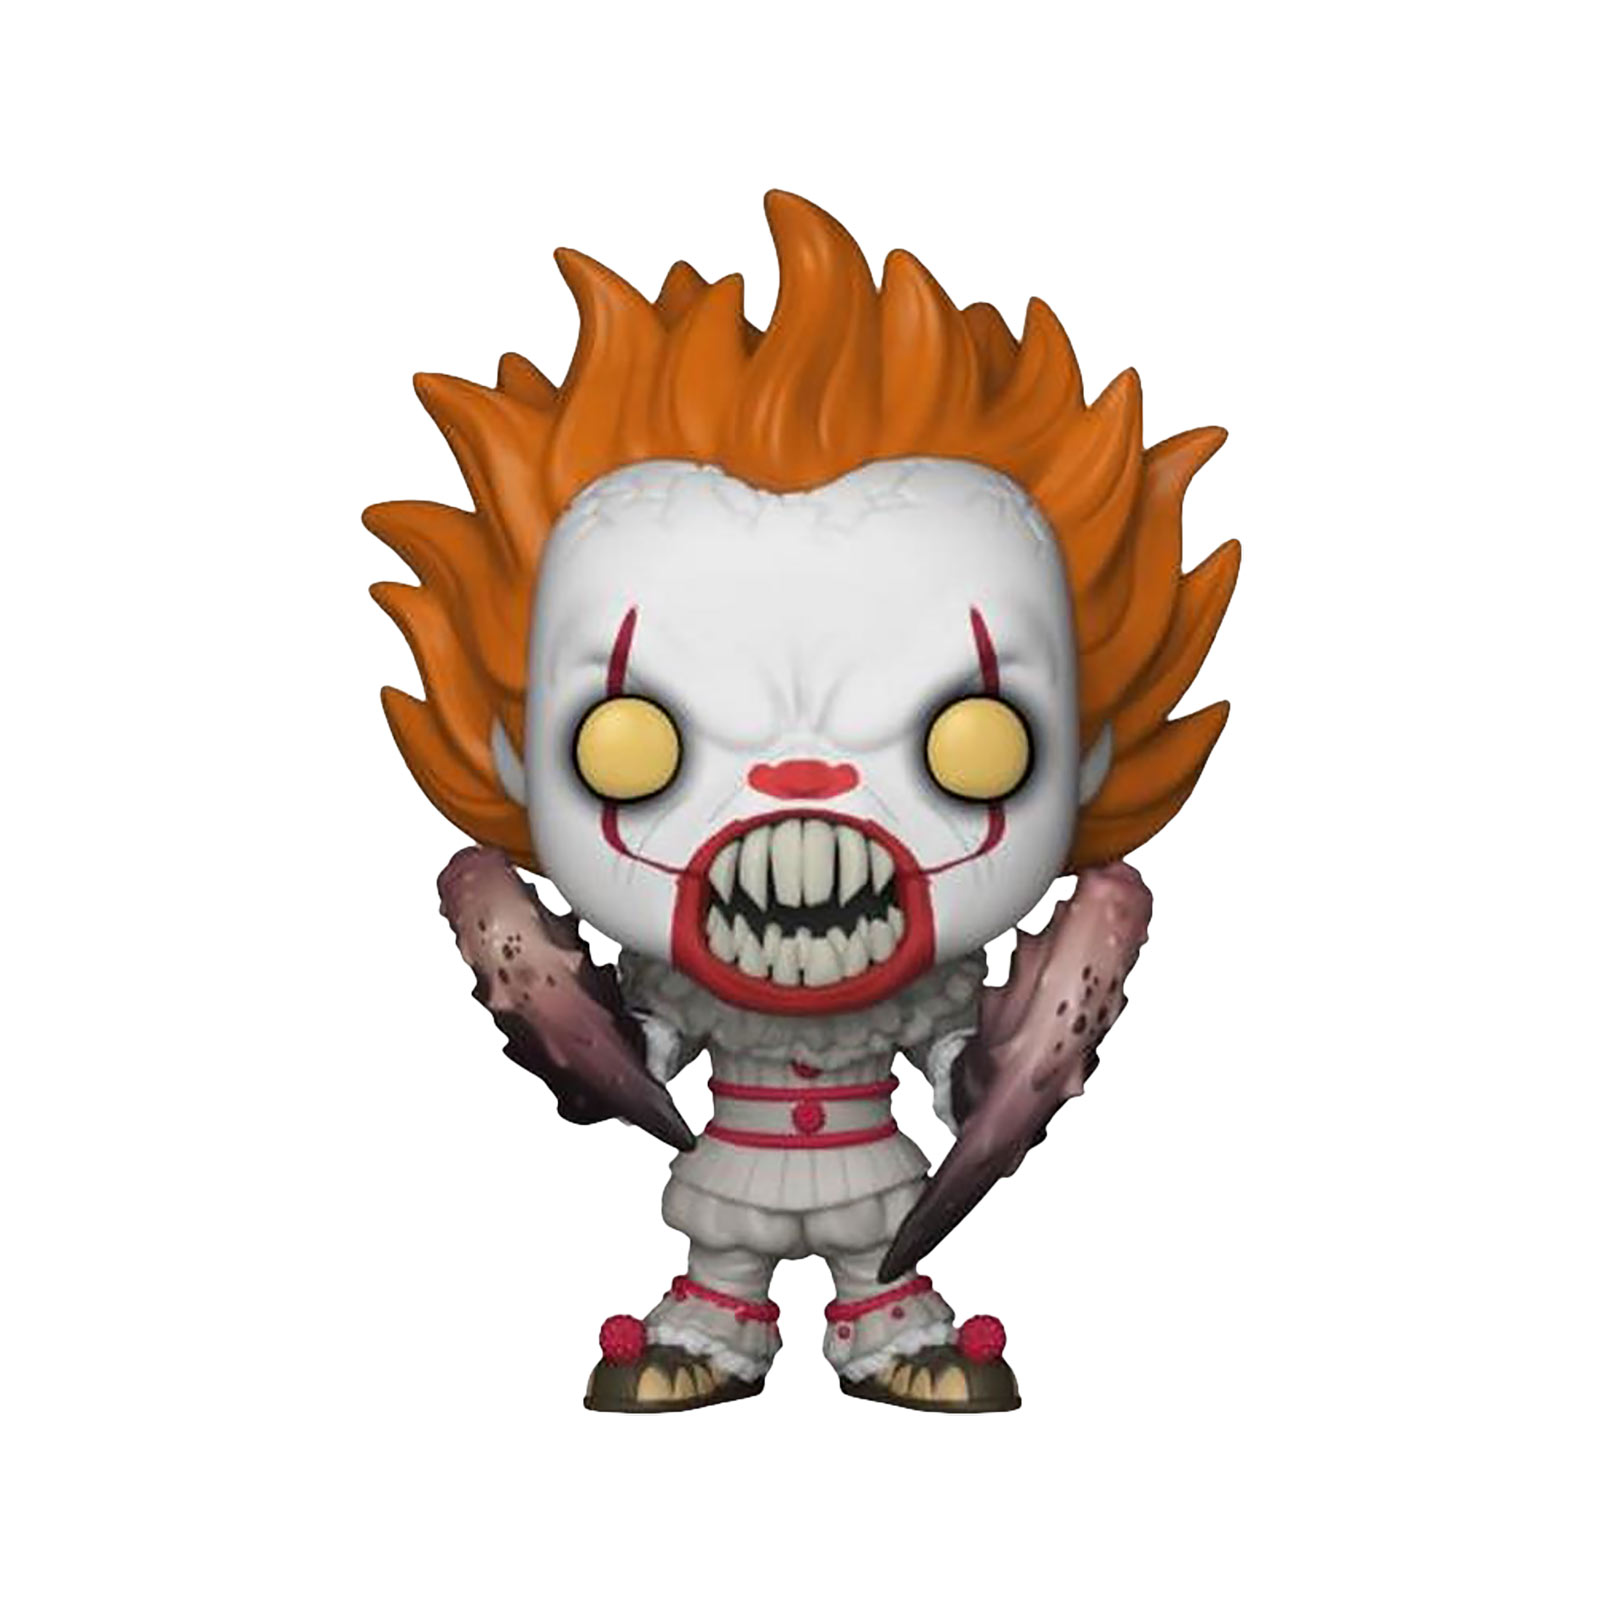 Stephen King's ES - Pennywise With Spider Legs Funko Pop Figurine